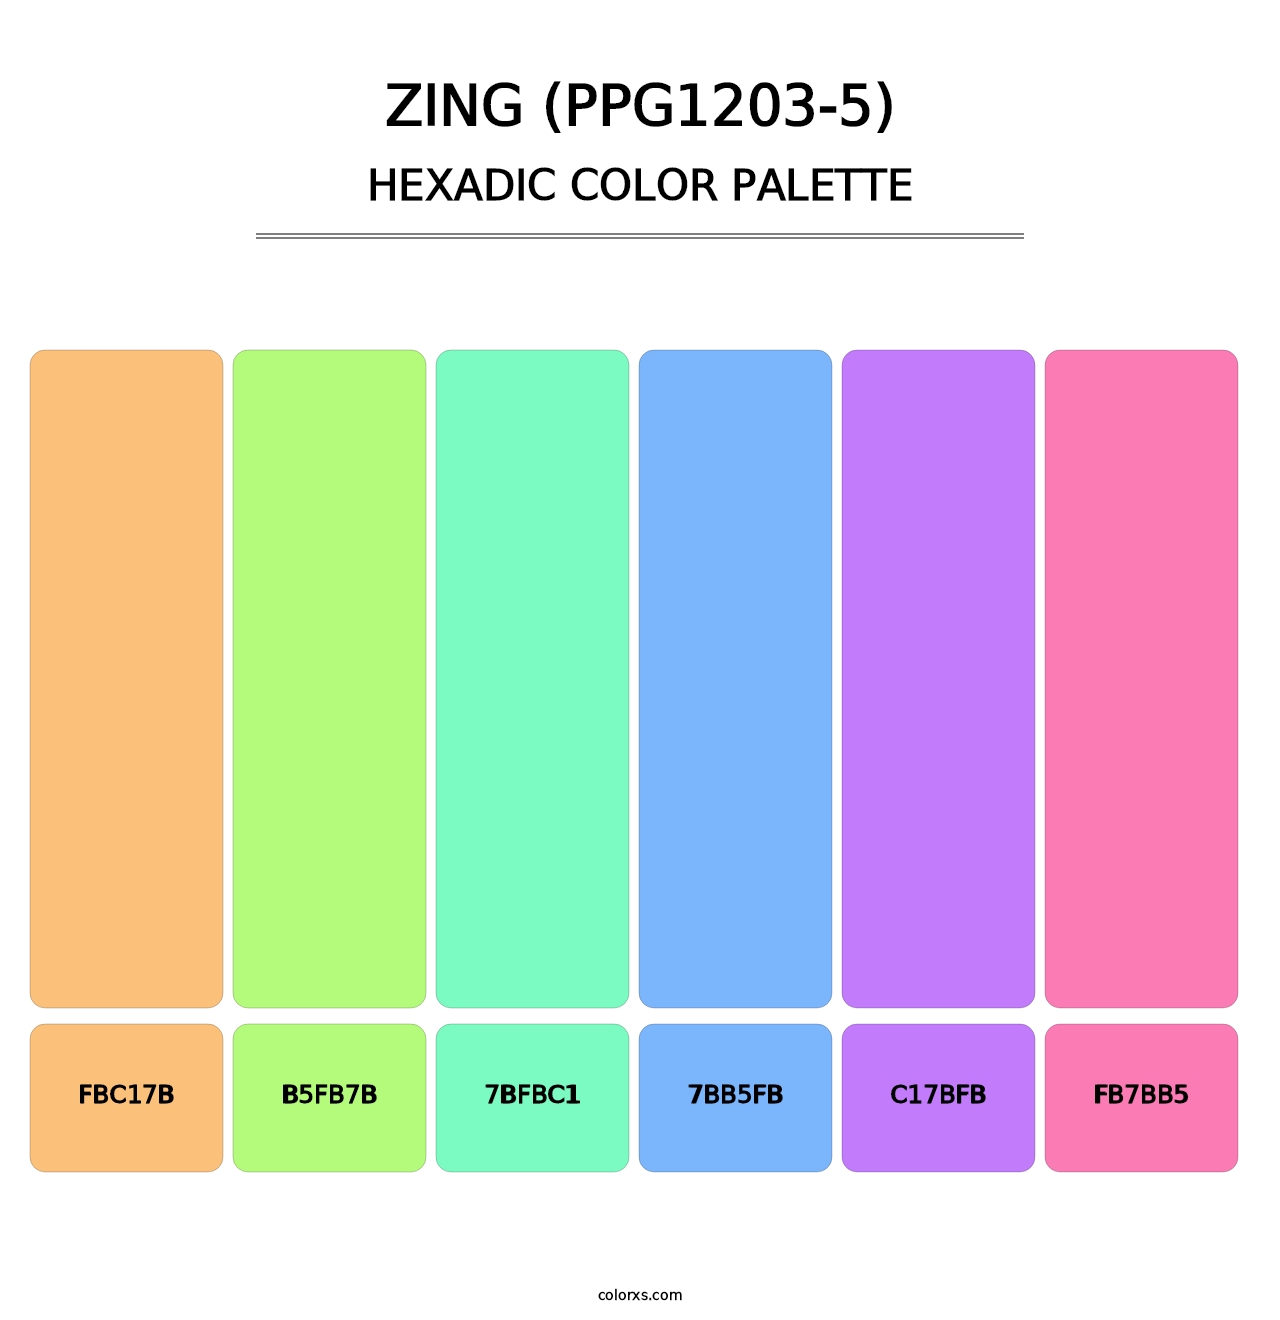 Zing (PPG1203-5) - Hexadic Color Palette